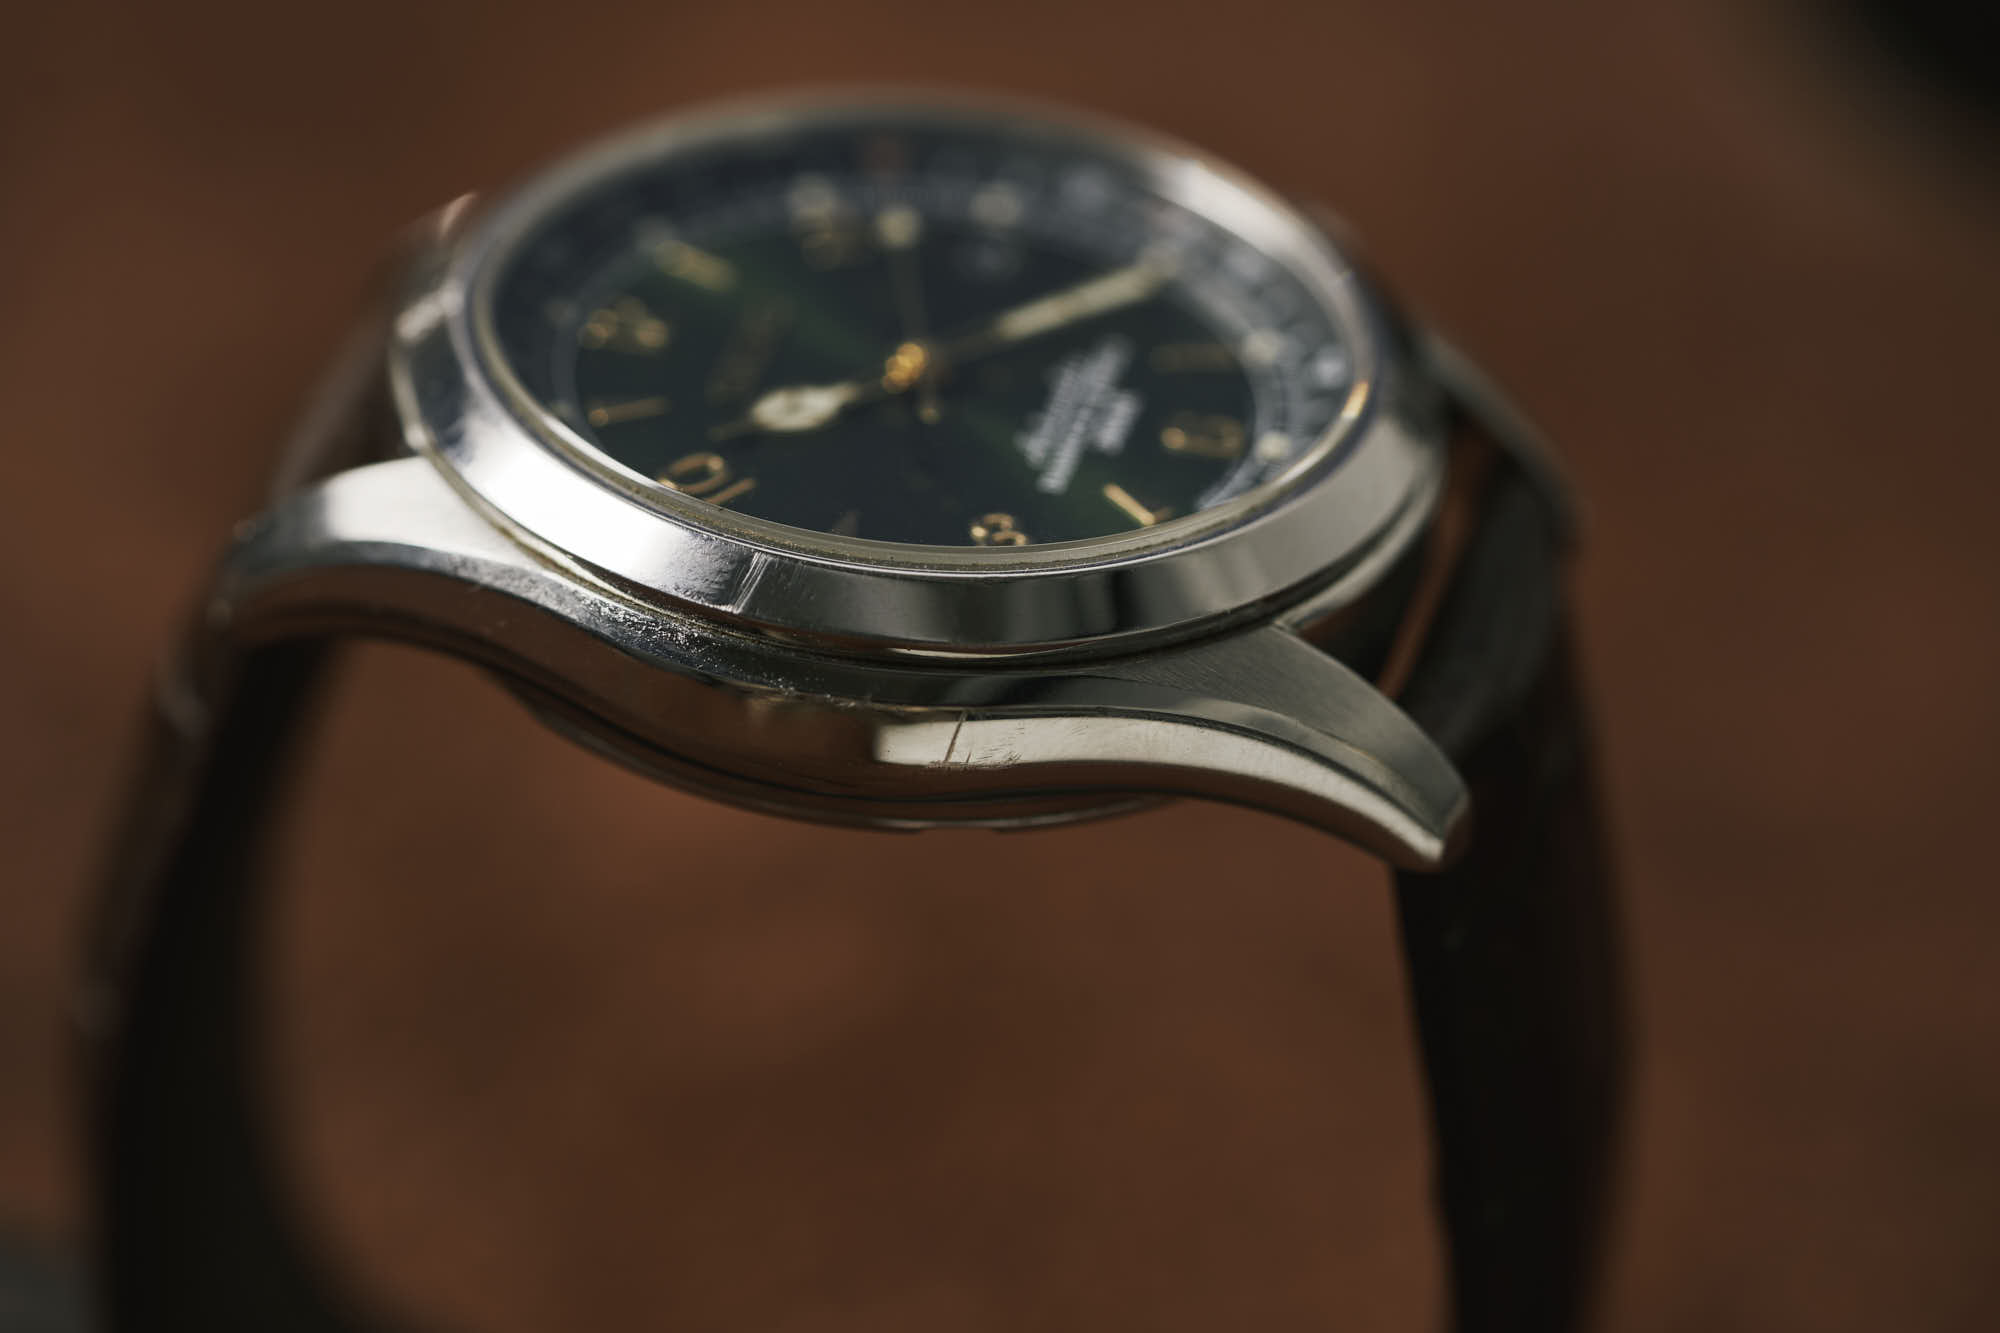 [VIDEO] Missed Review: The Seiko Alpinist SARB017 - Worn & Wound